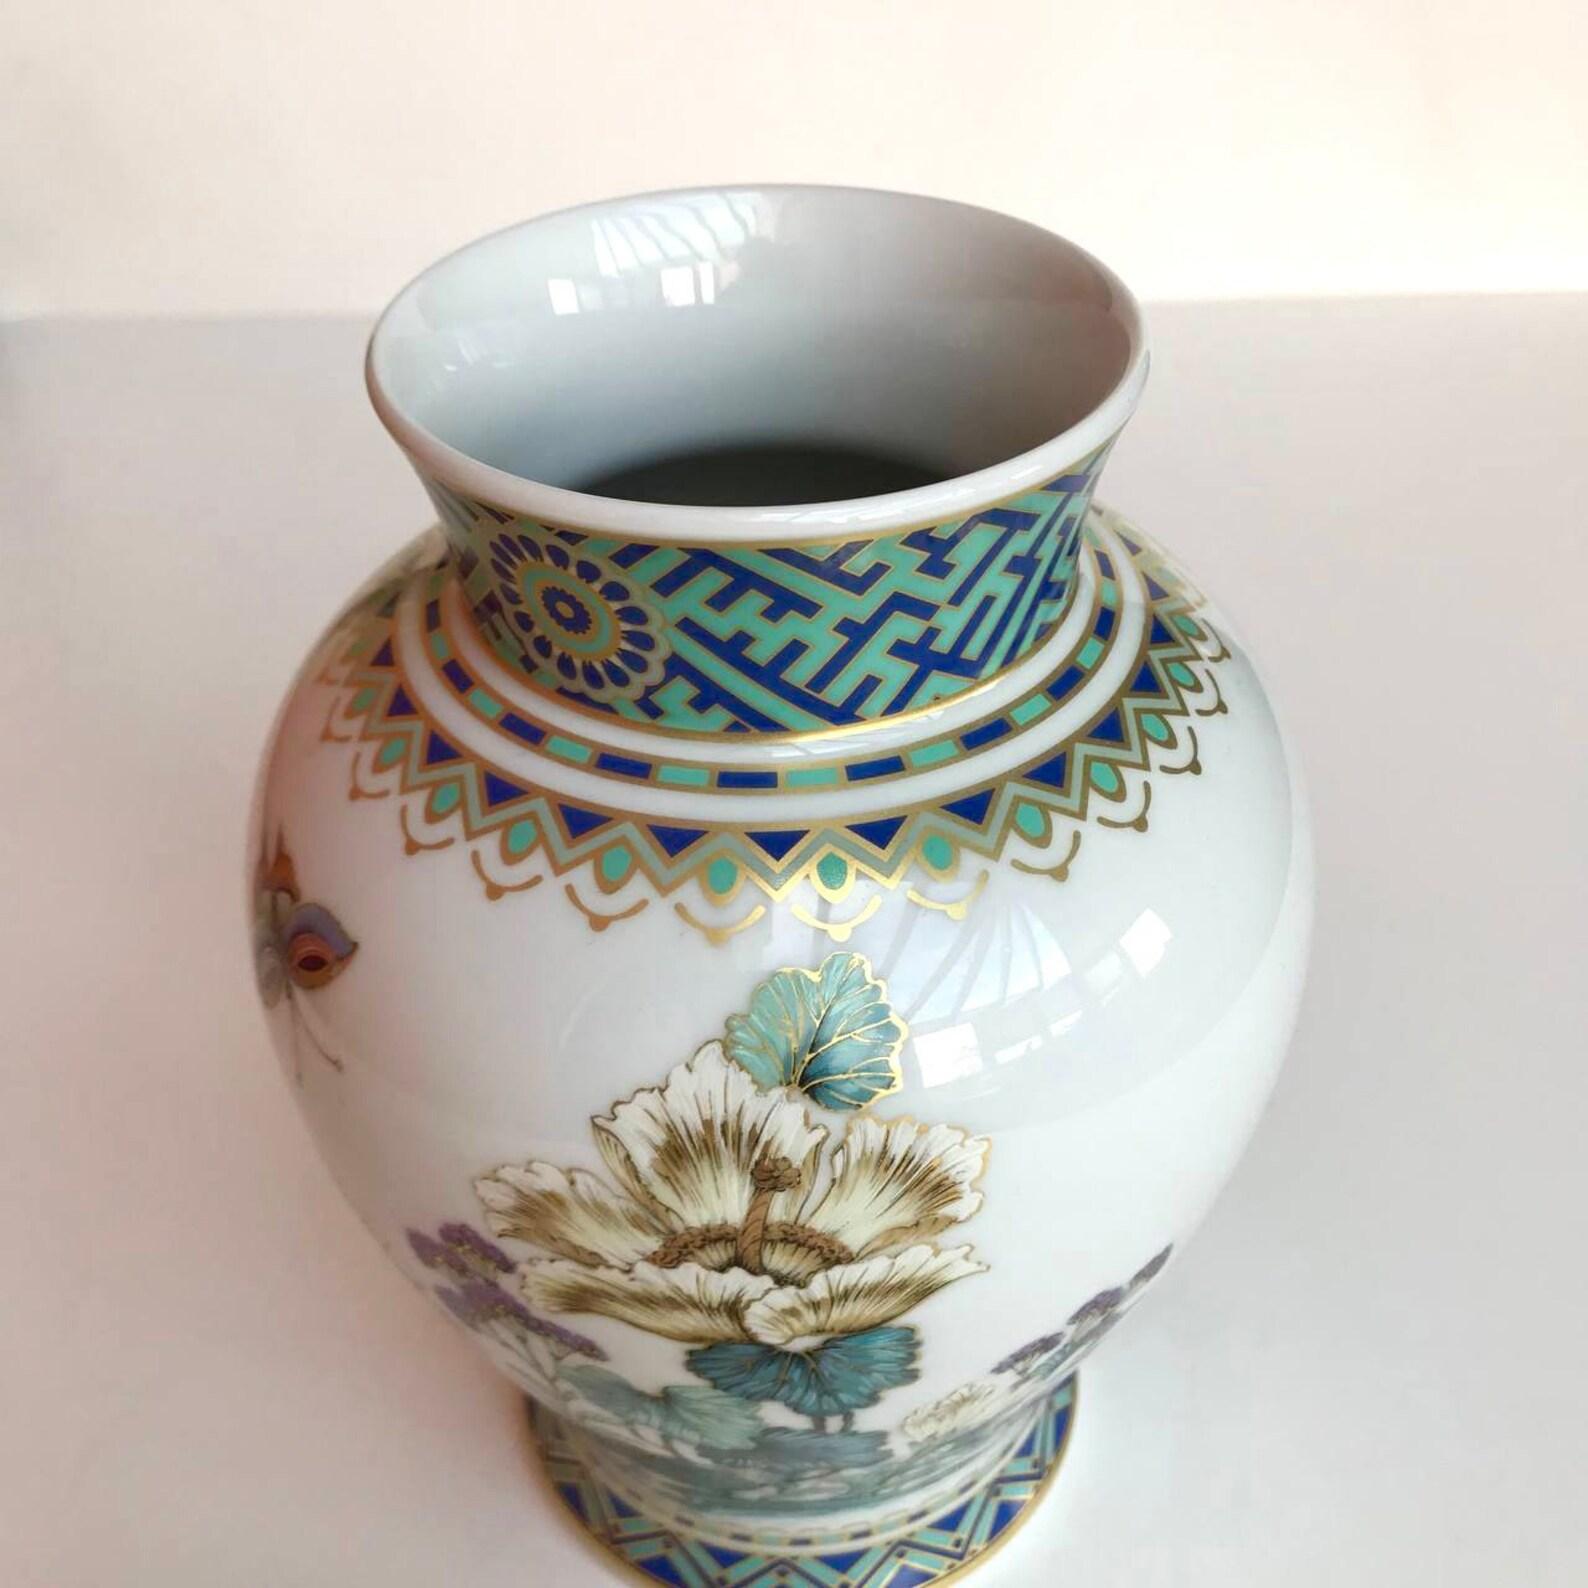 Vintage vase with lid from Kaiser Germany.

Magnificent vase with floral pattern.

Monarchin series vase.

Designer K. Nossek.

Vintage. 

1970s.

Porcelain.

Handmade.

Limited edition. Only one available.

In excellent condition,